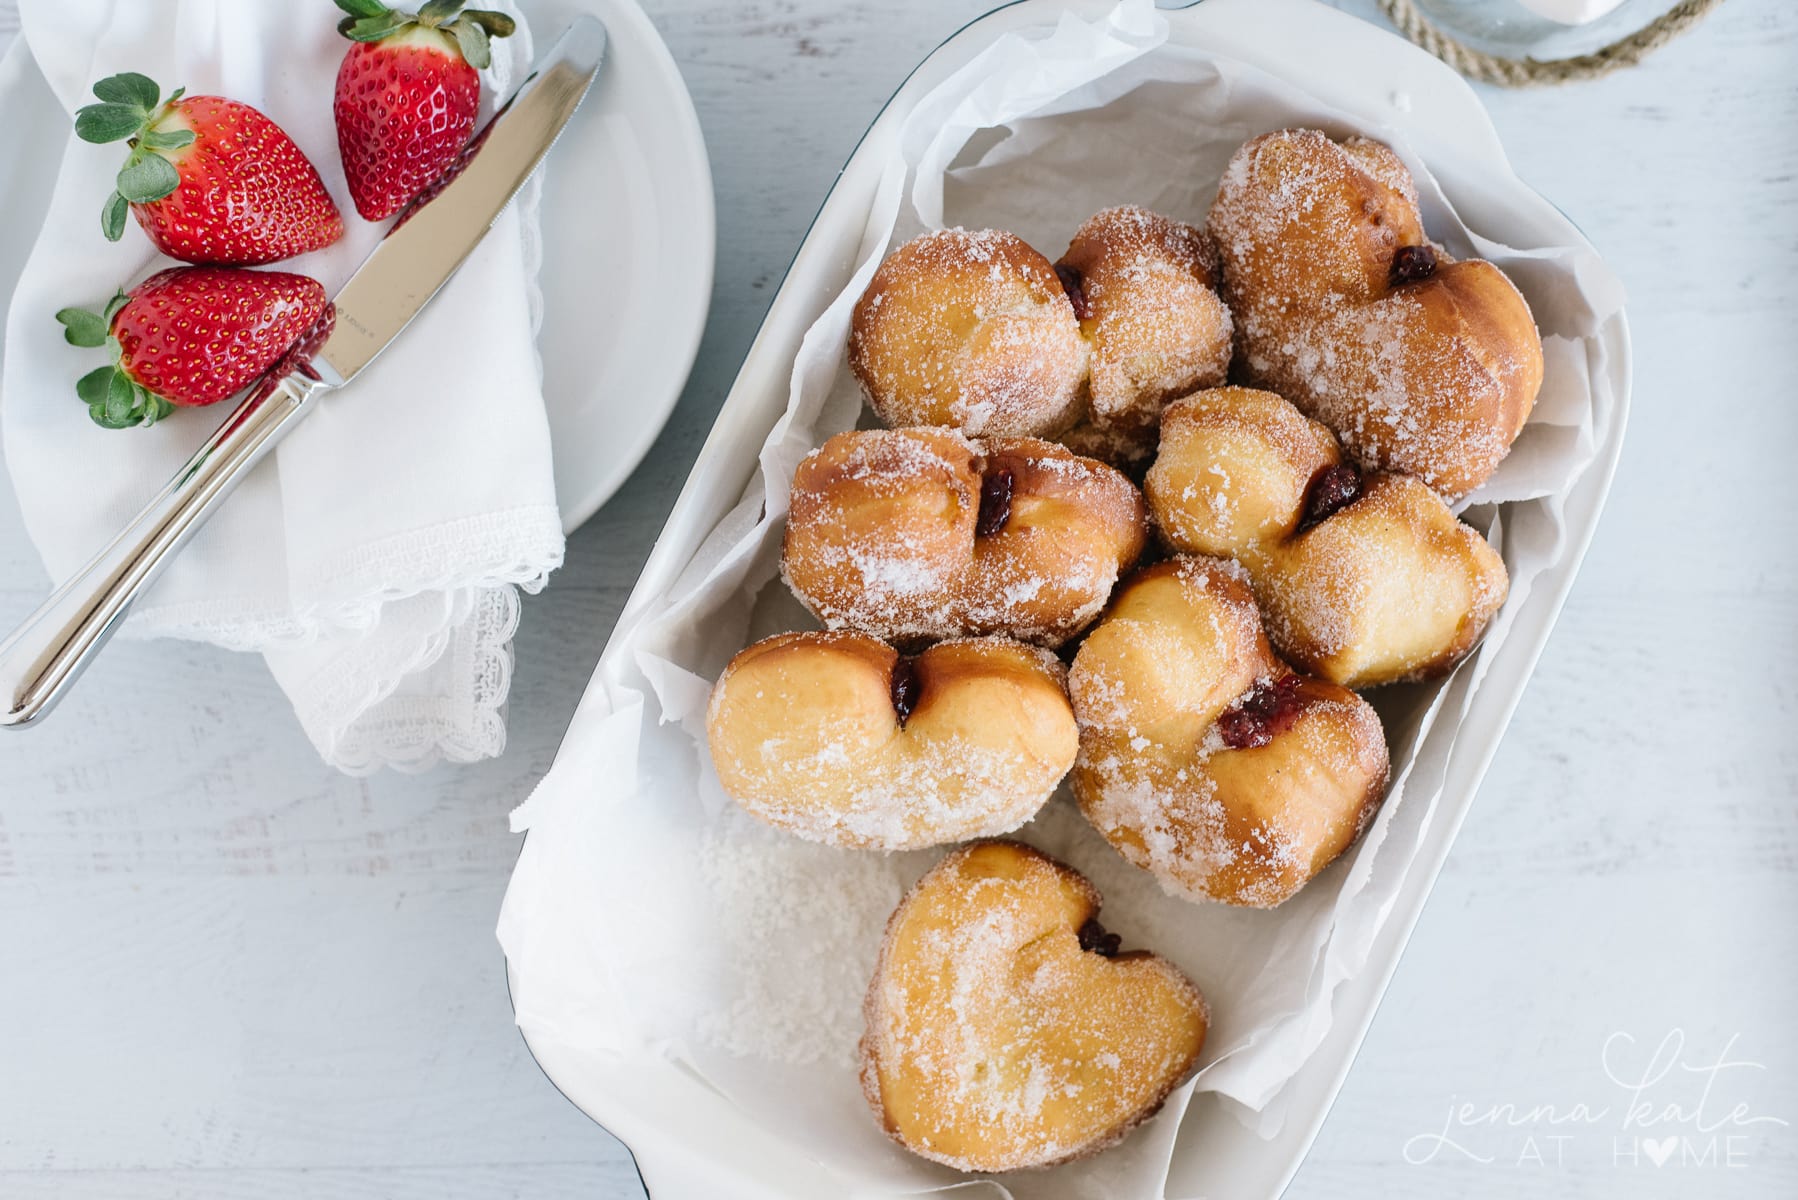 dish filled with freshly baked yeast donuts filled with jam